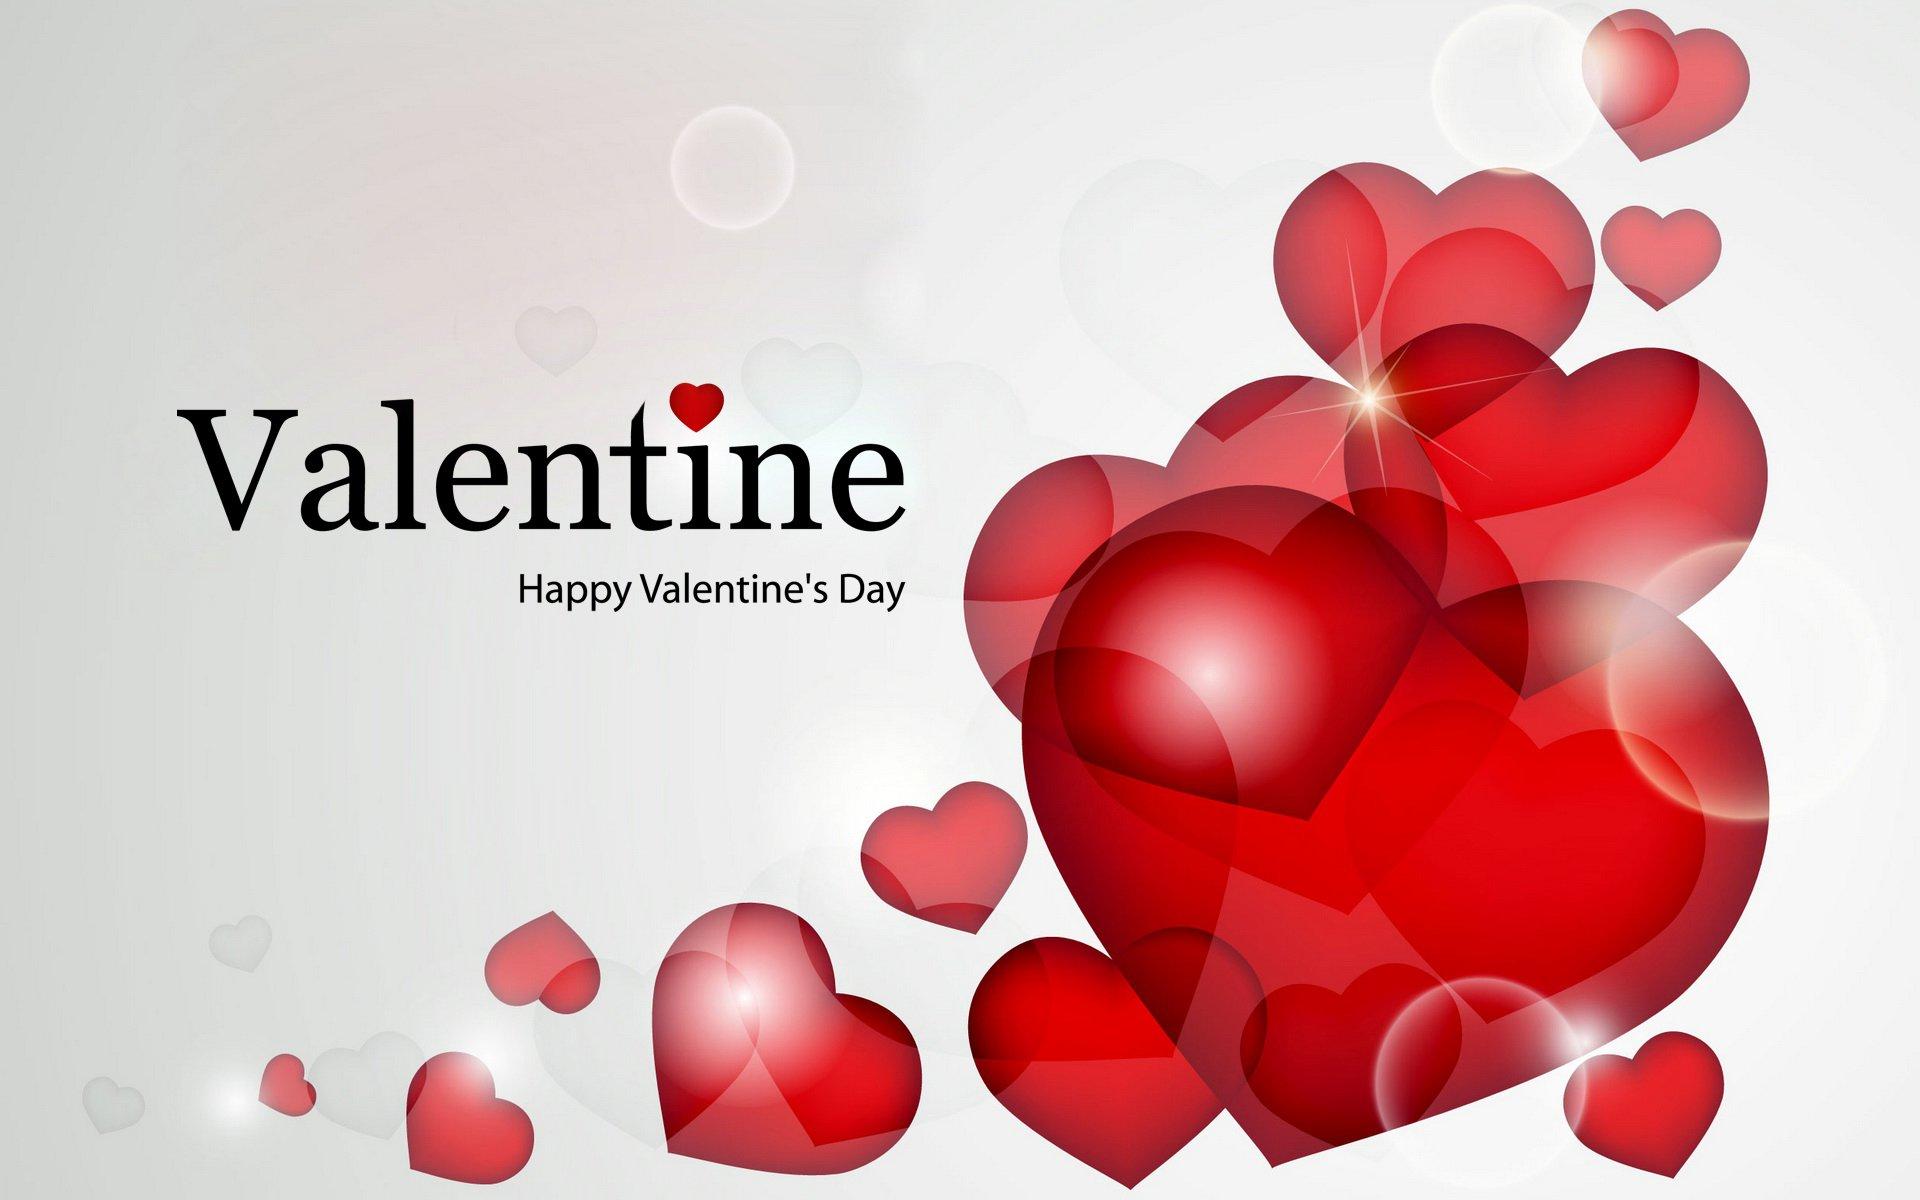 Happy Valentine's Day Card HD Wallpaper. Background Image